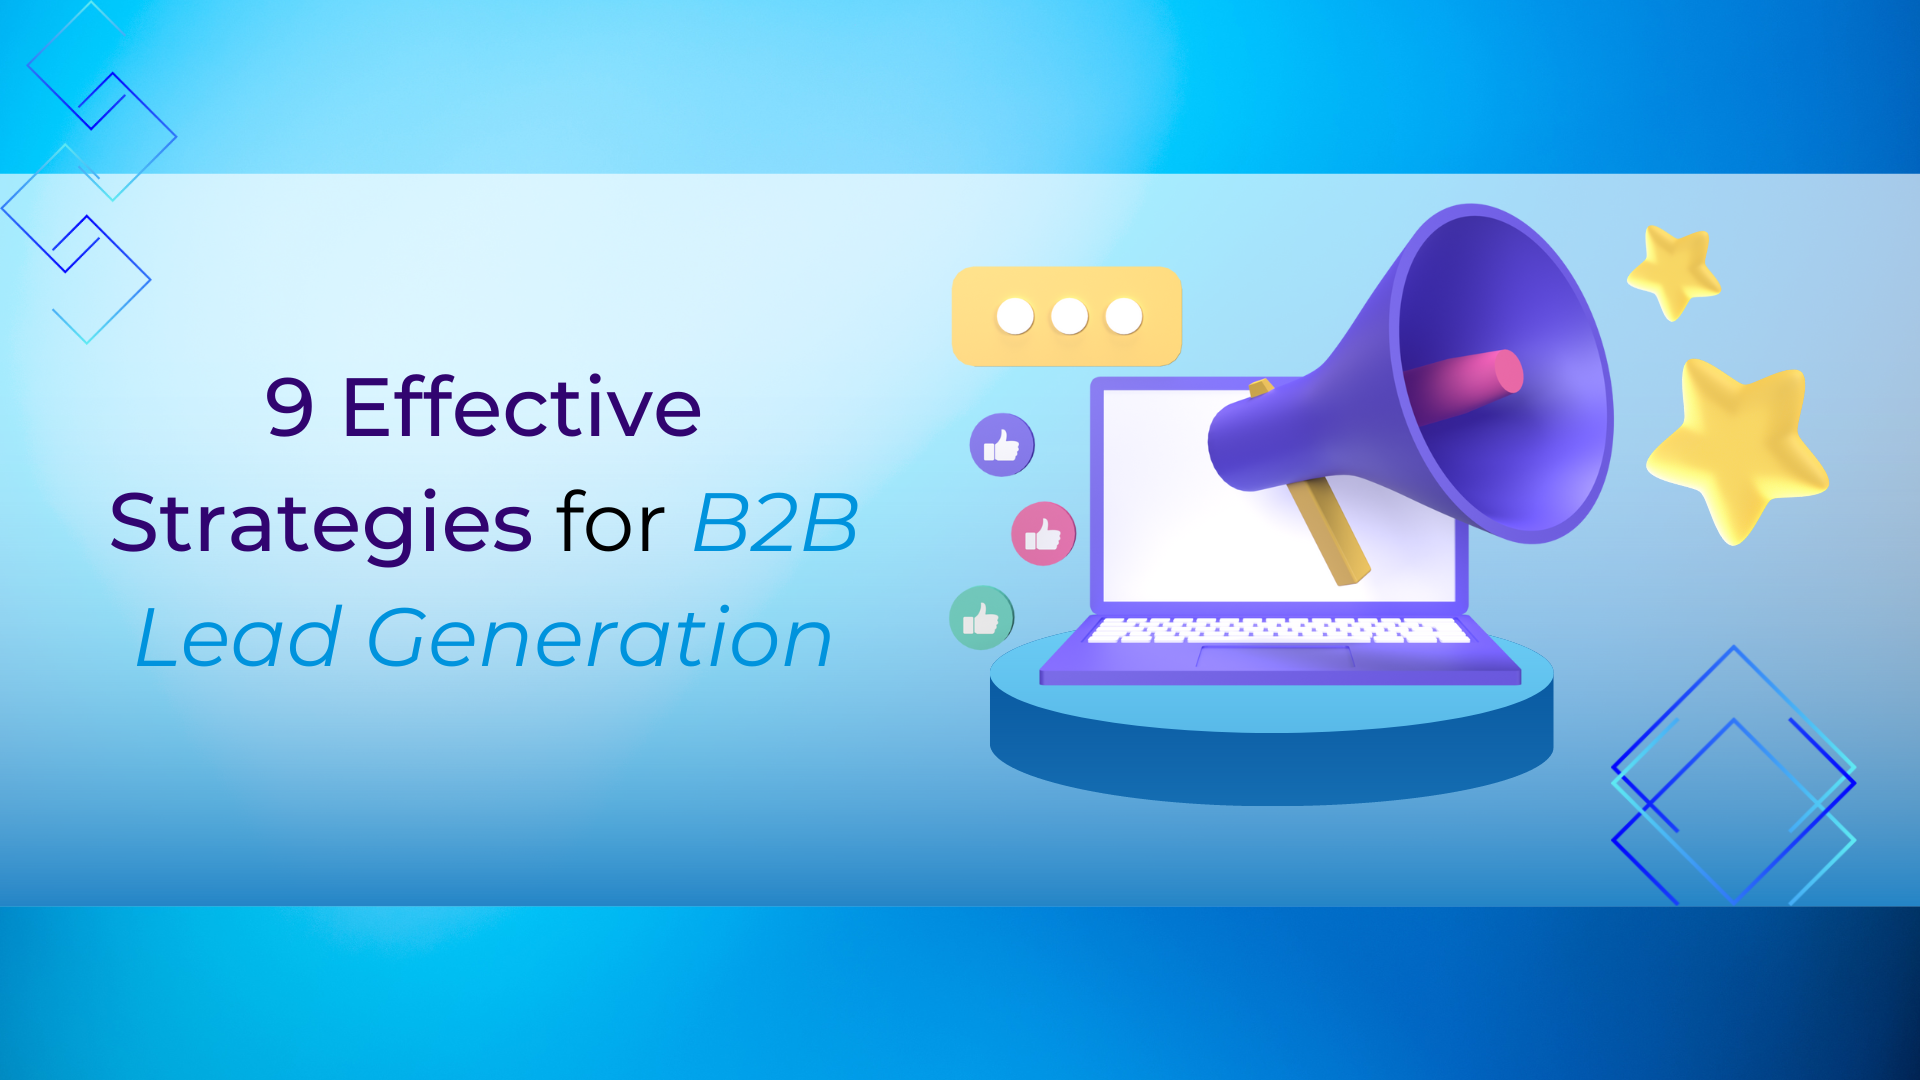 9 Effective Lead Generation Strategies for B2B Business